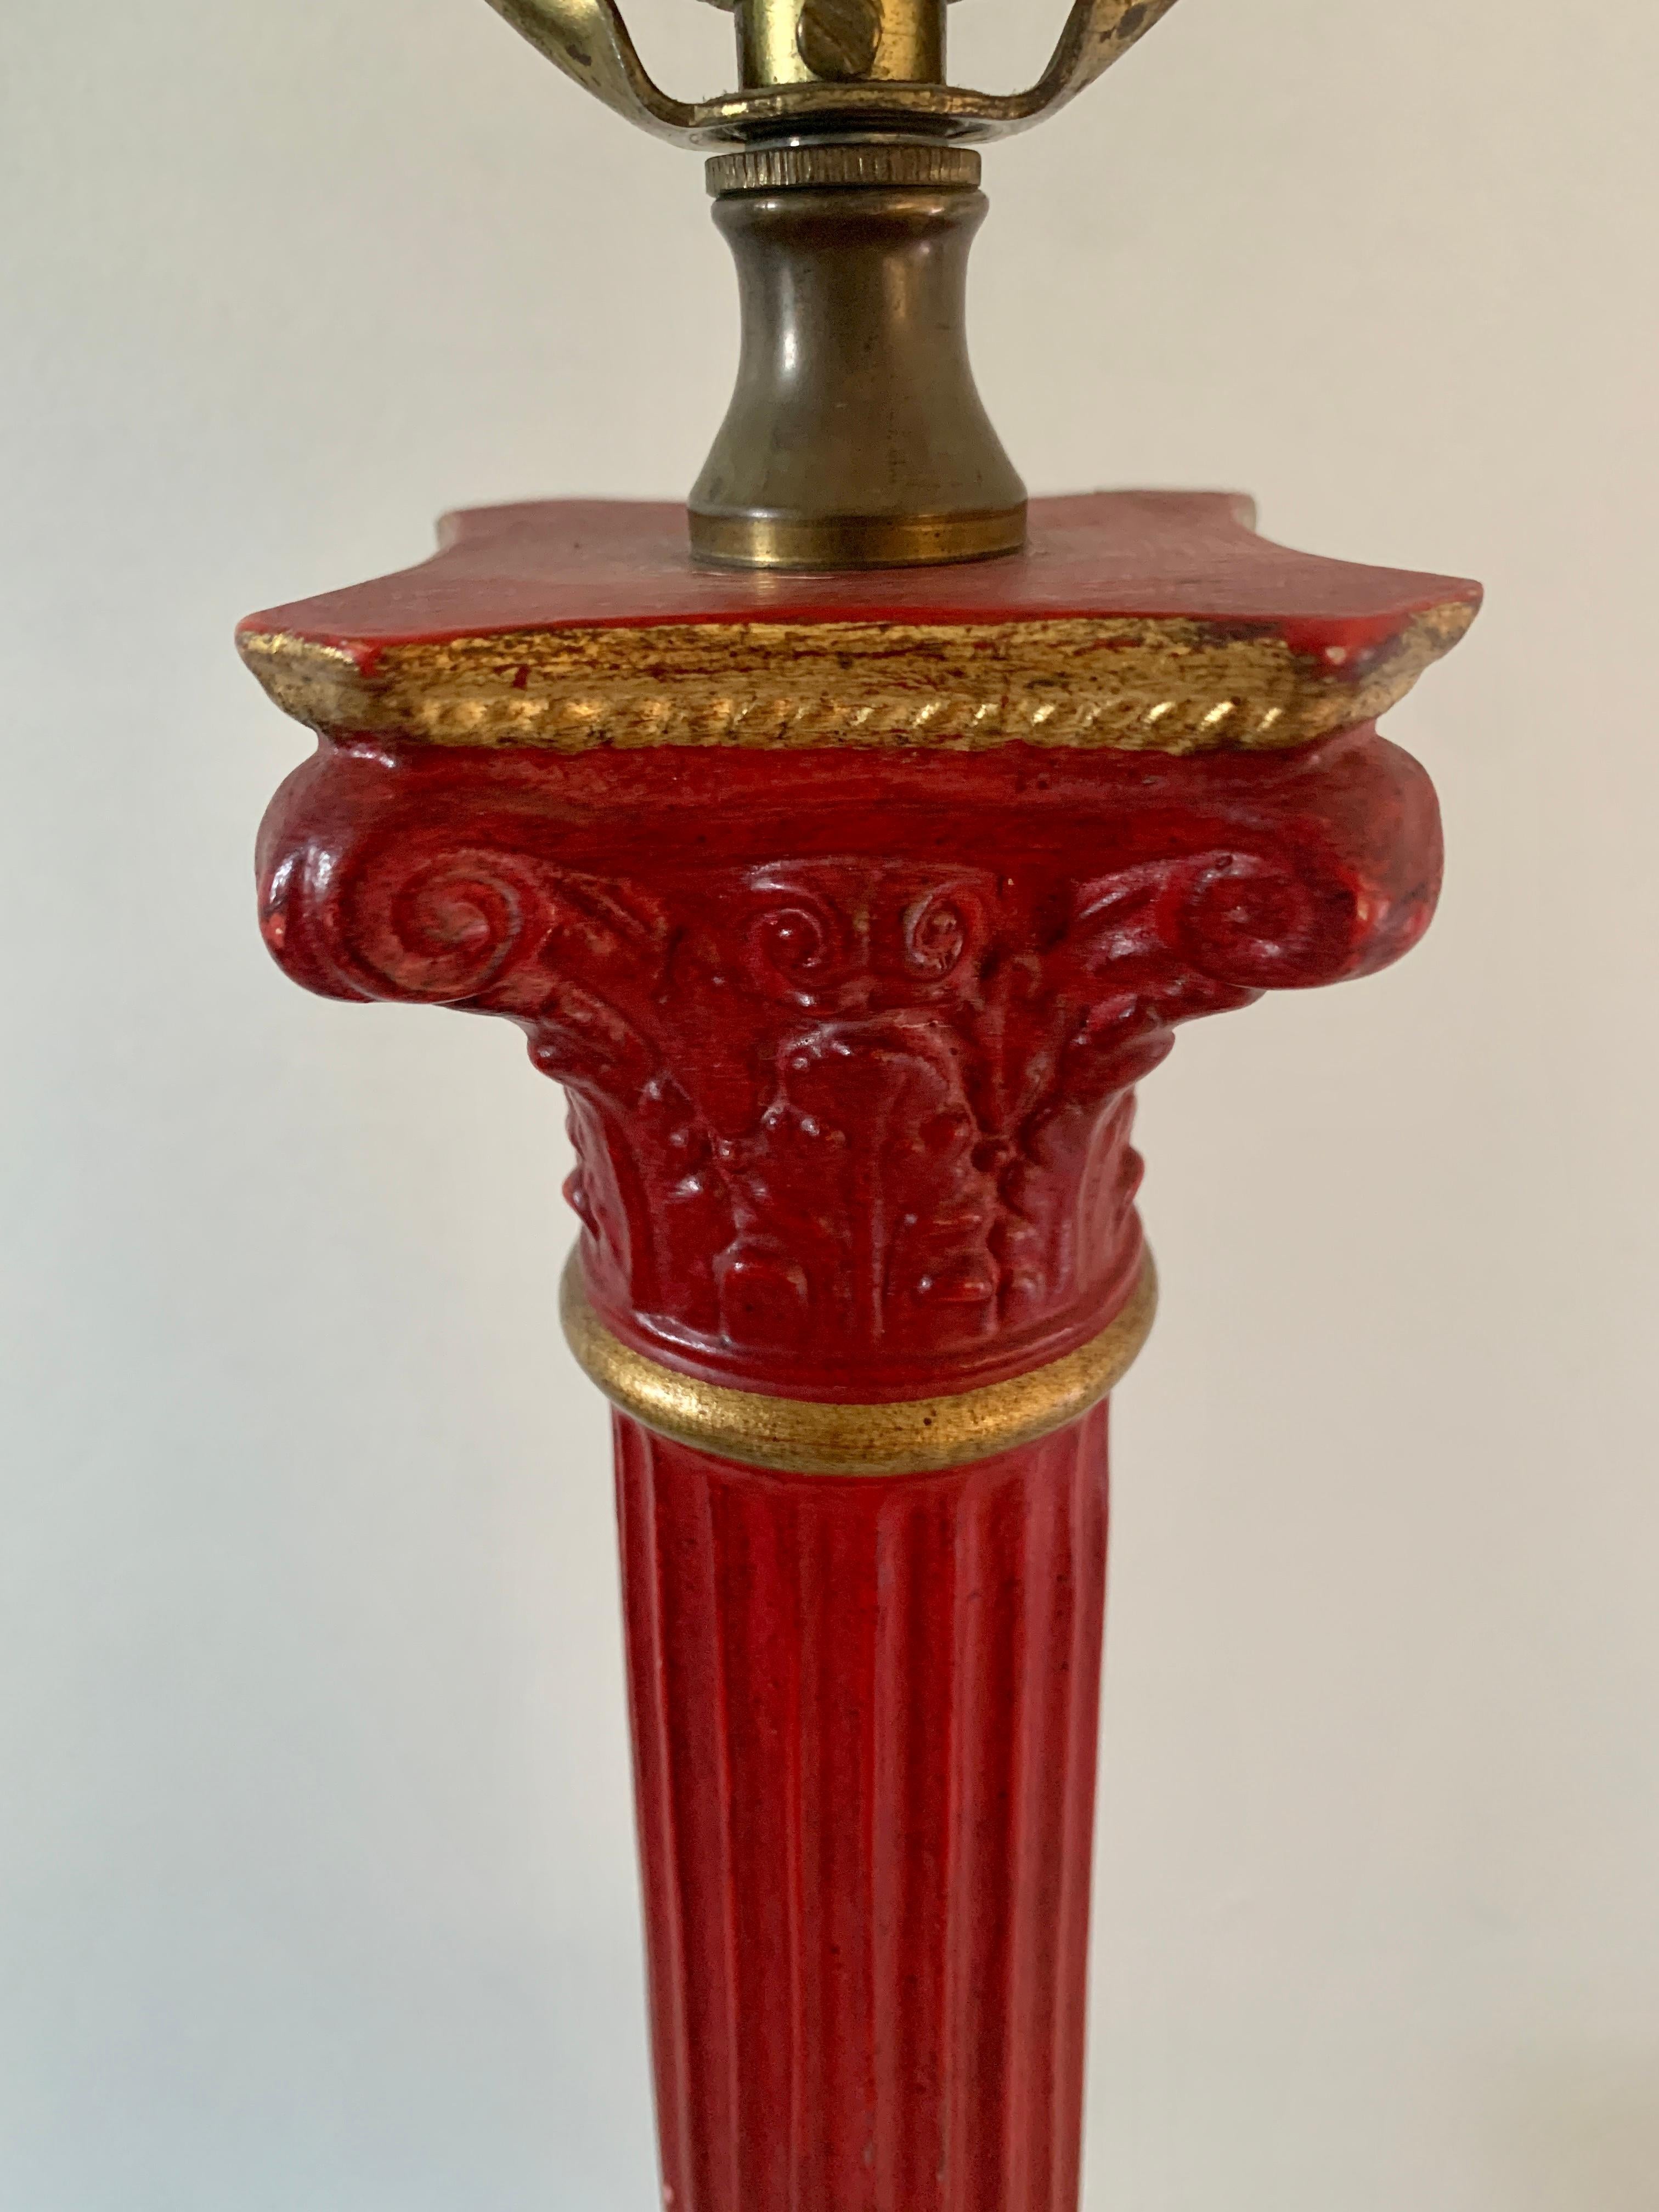 A gorgeous Neoclassical style red and gold corinthian column table lamp with laurel wreath accent

USA, Mid-20th Century

Measures: 5.25